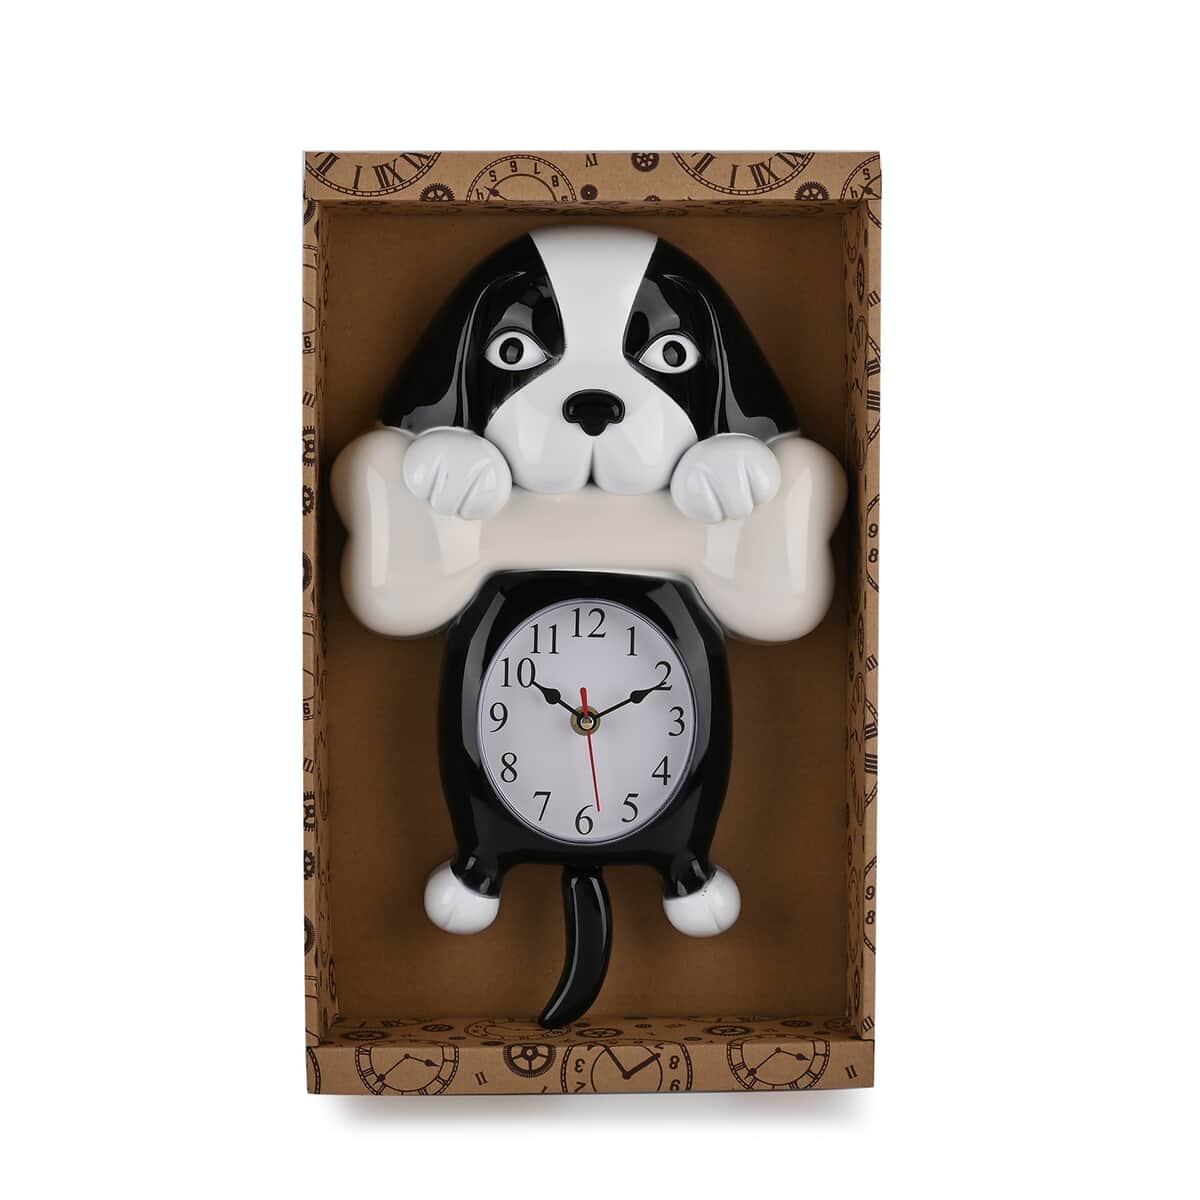 Black Dog Shaped Wall Clock with Moving Tail (14.17"x9.37"x2.51") (1xAA Battery Not Included) image number 2